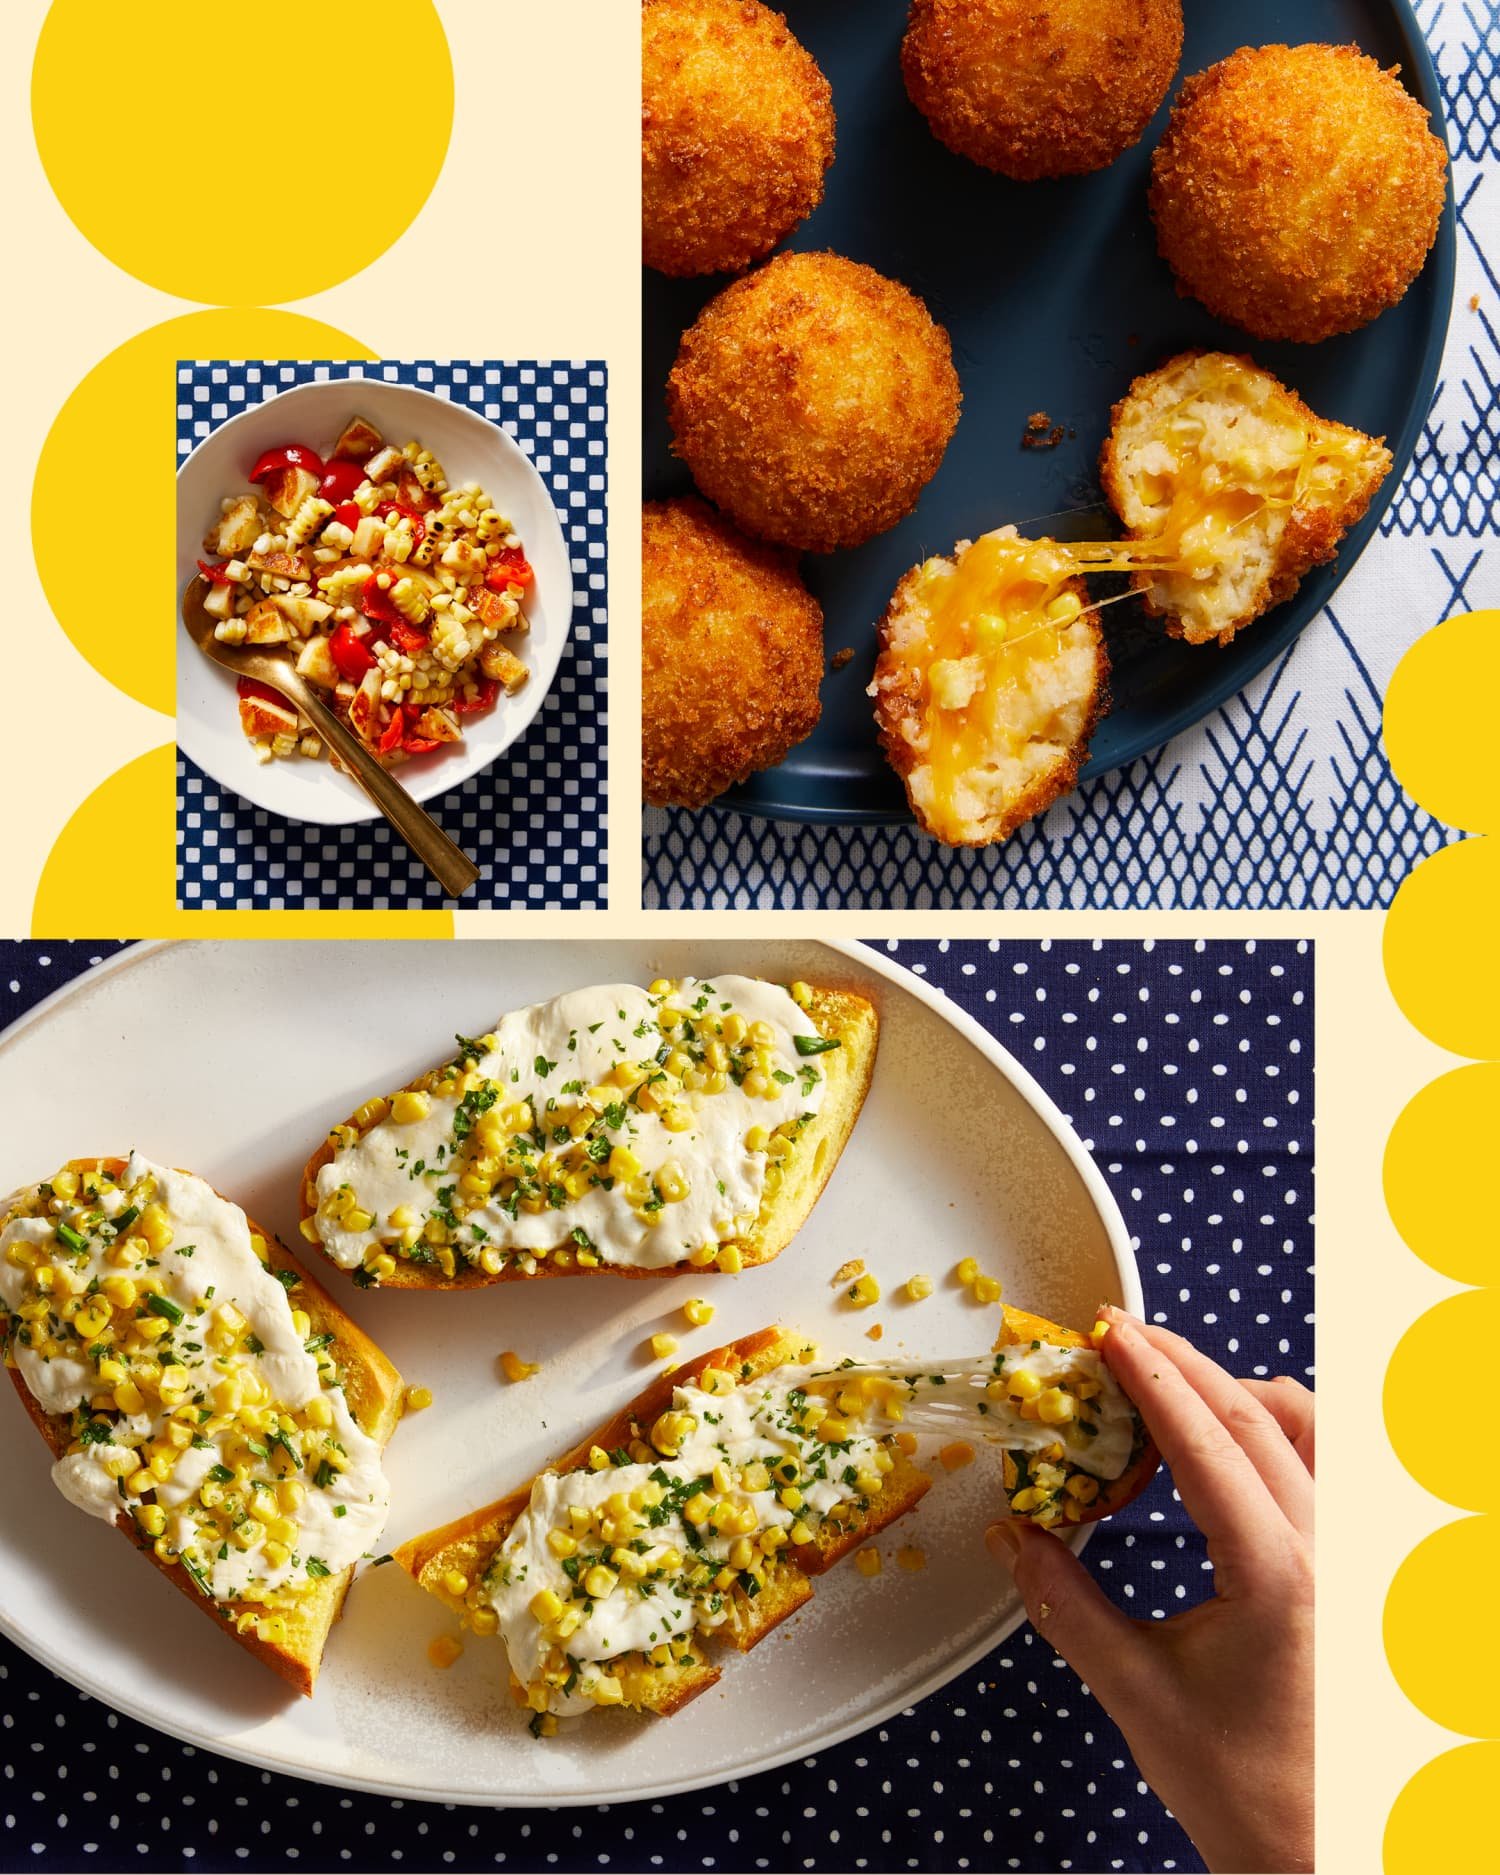 Name a Better Summer Duo than Corn and Cheese. We'll Wait.